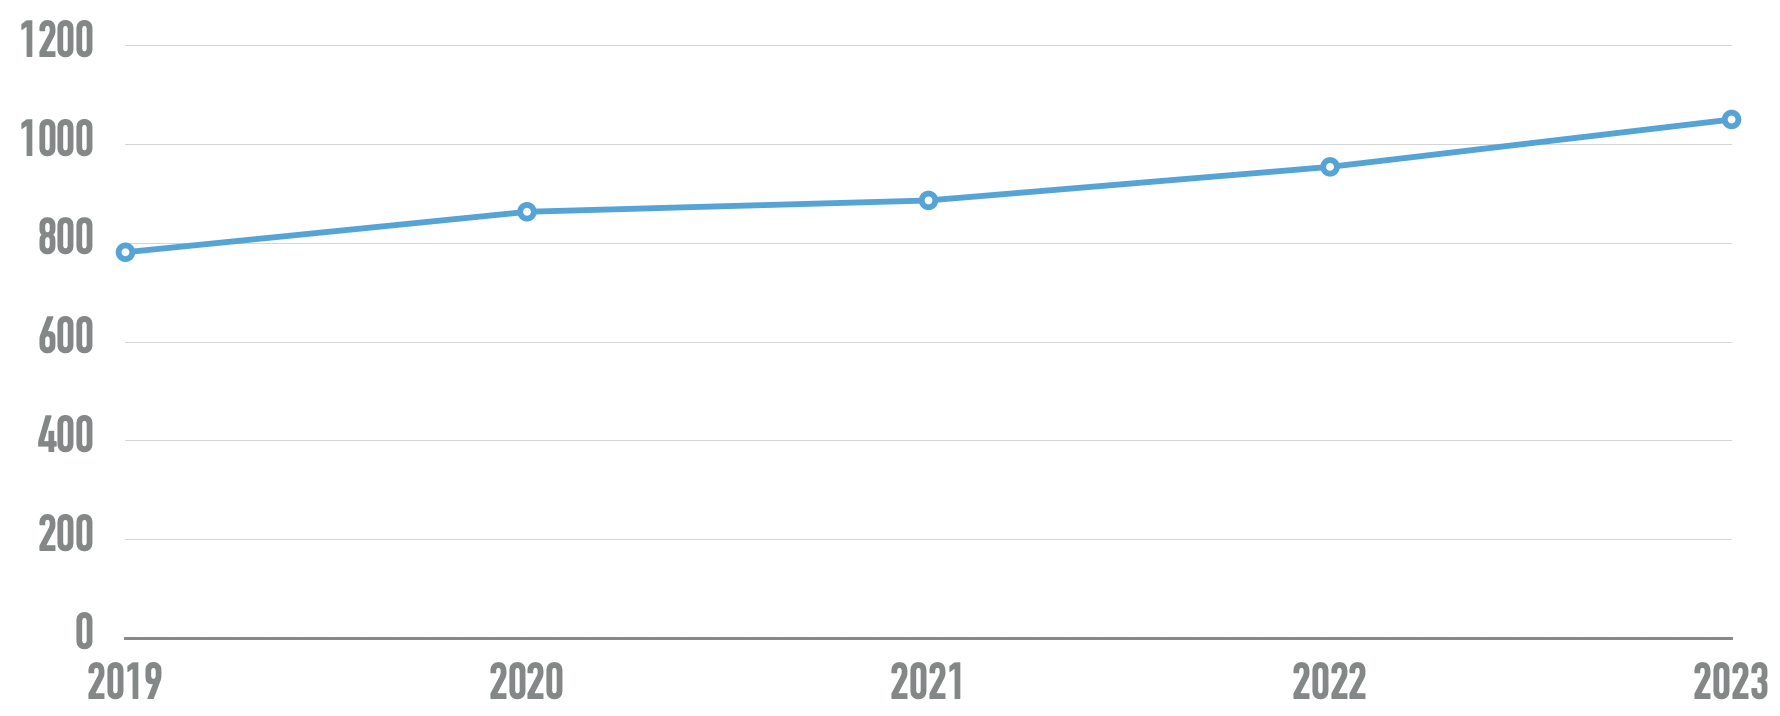 Line chart showing number of home page elements steadily increasing from 782 in 2019 to 1050 in 2023.